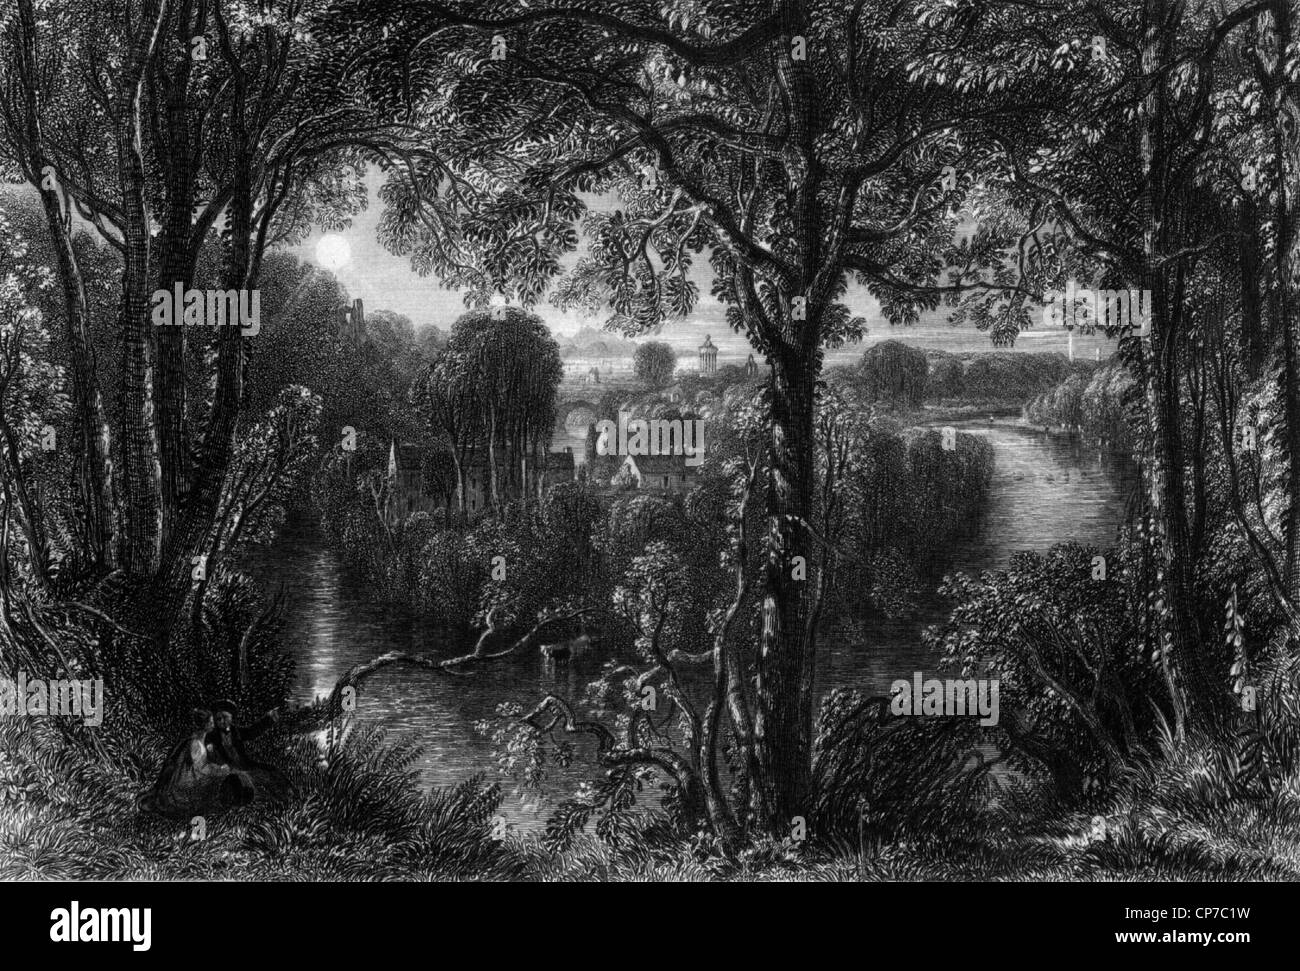 River Doon in South Ayrshire viewed through forest, Scotland. Engraved by William Miller in 1840. Stock Photo